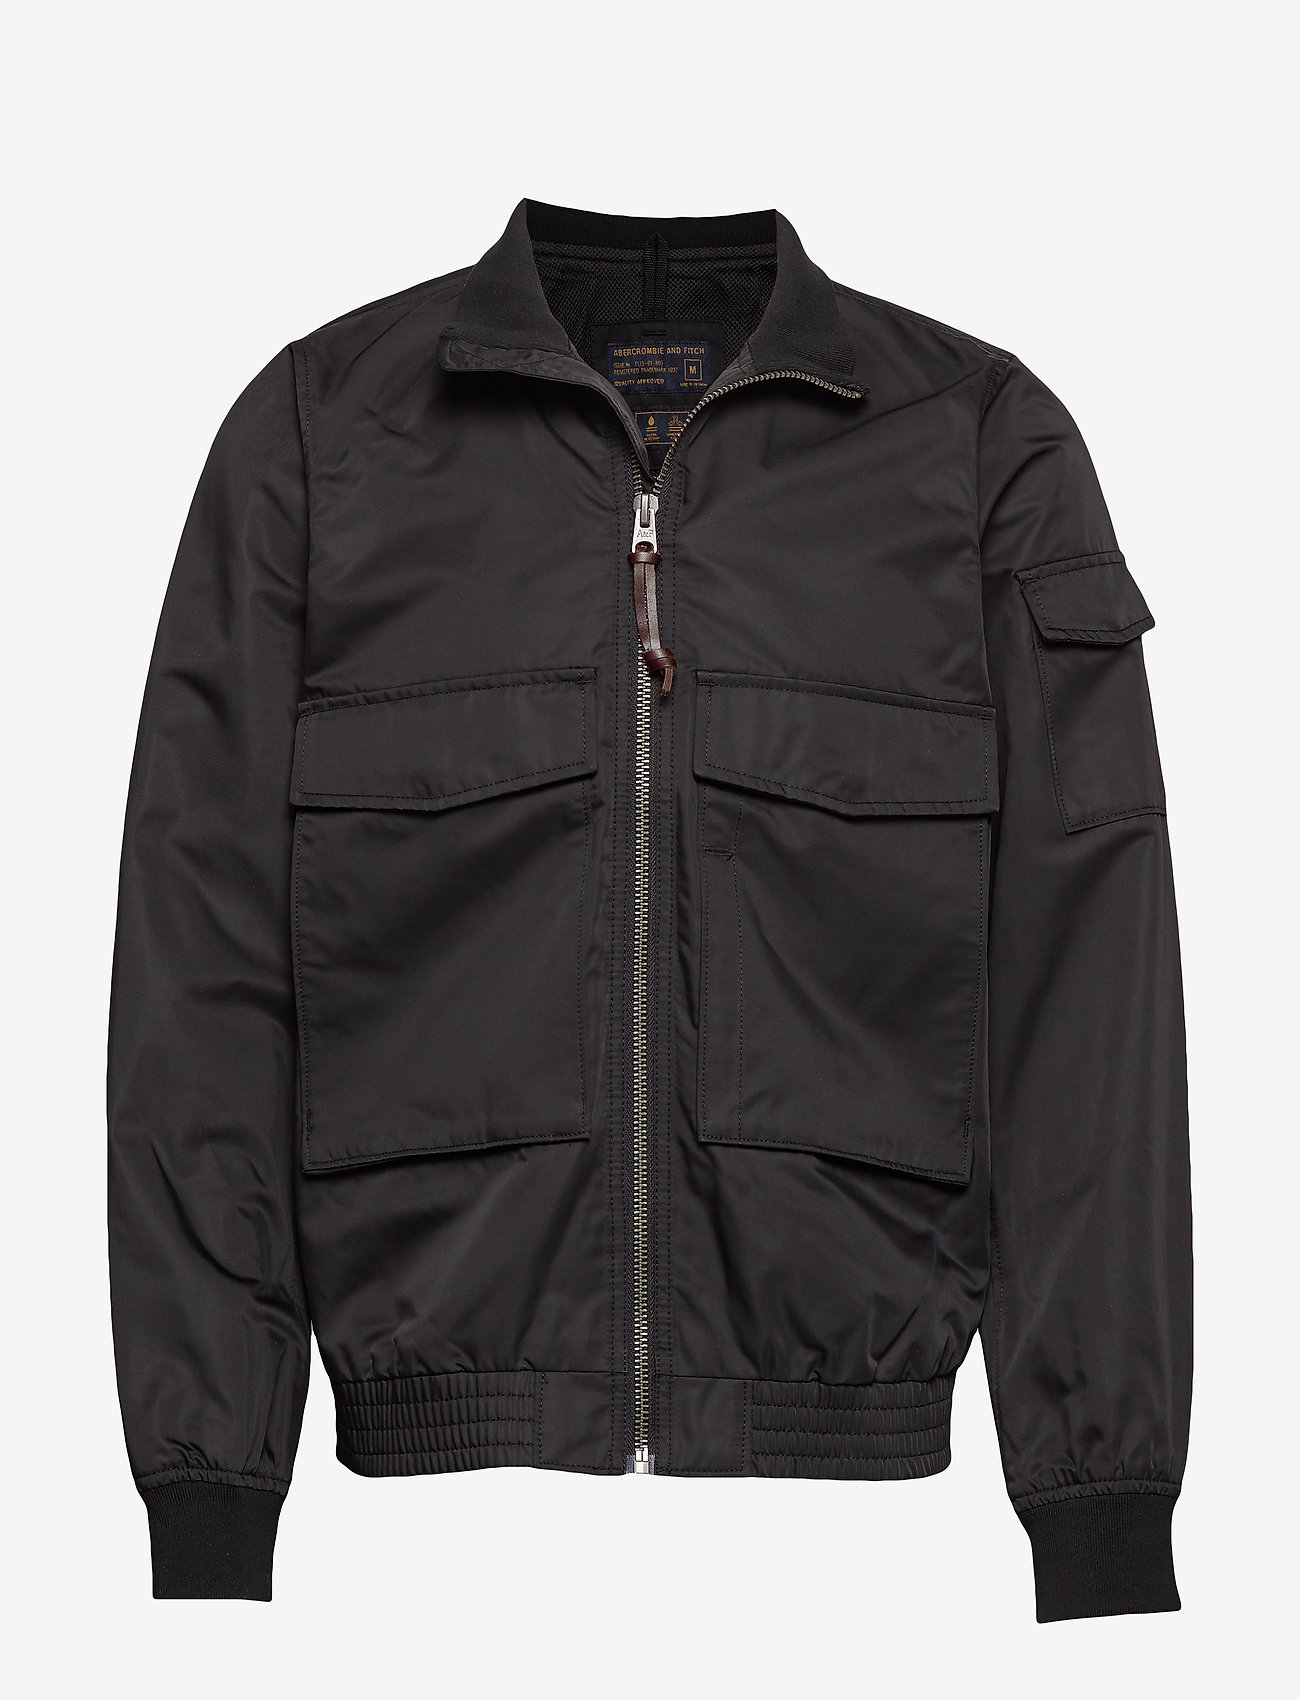 abercrombie and fitch black jacket